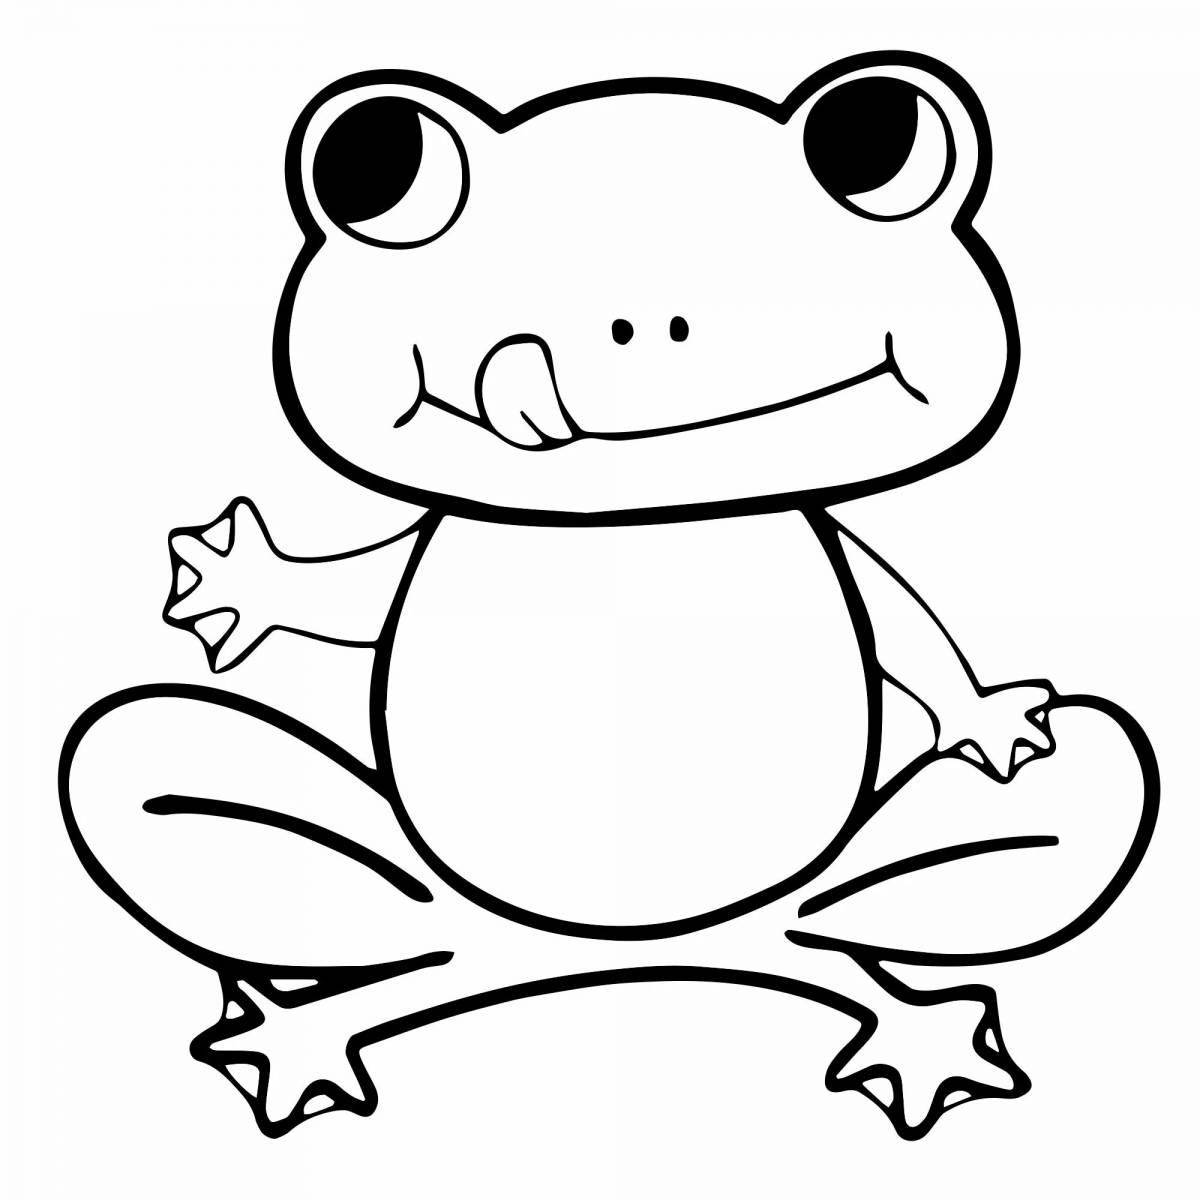 Crazy toad coloring book for kids